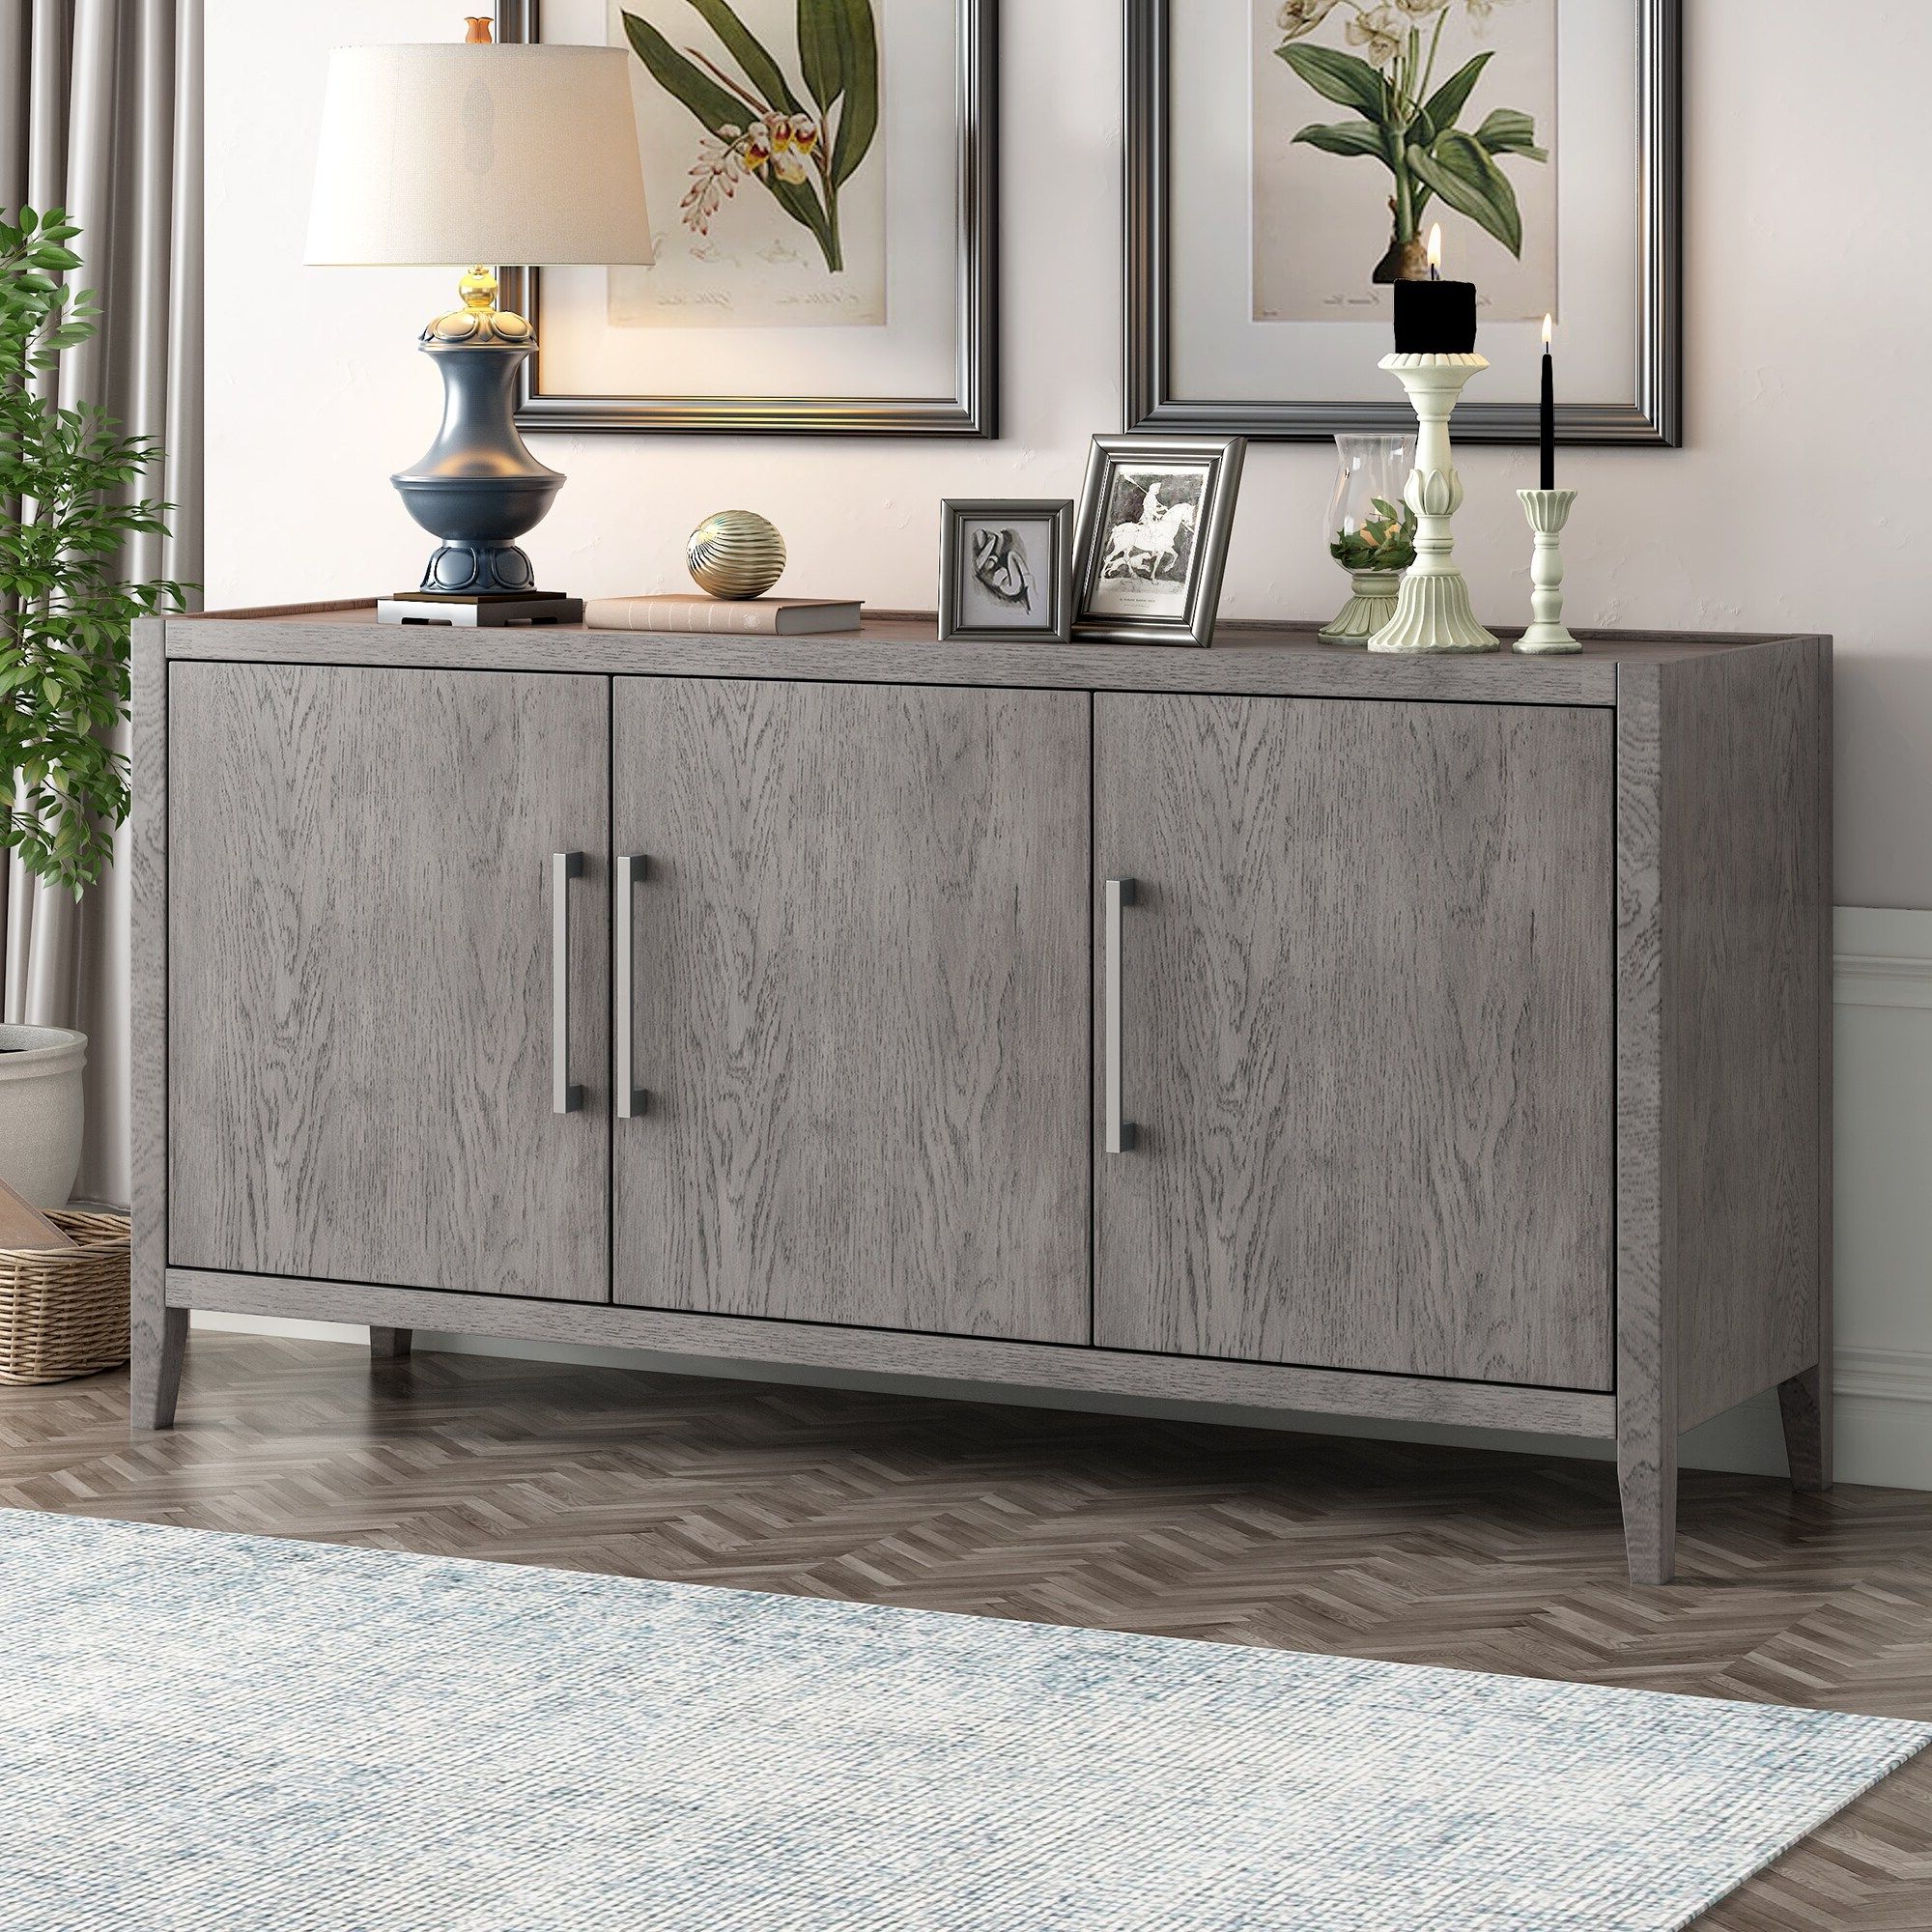 Most Recent Wooden Storage Cabinet Sideboard With 3 Doors And Adjustable Shelf – On  Sale – Bed Bath & Beyond – 37194726 With 3 Doors Sideboards Storage Cabinet (View 8 of 15)